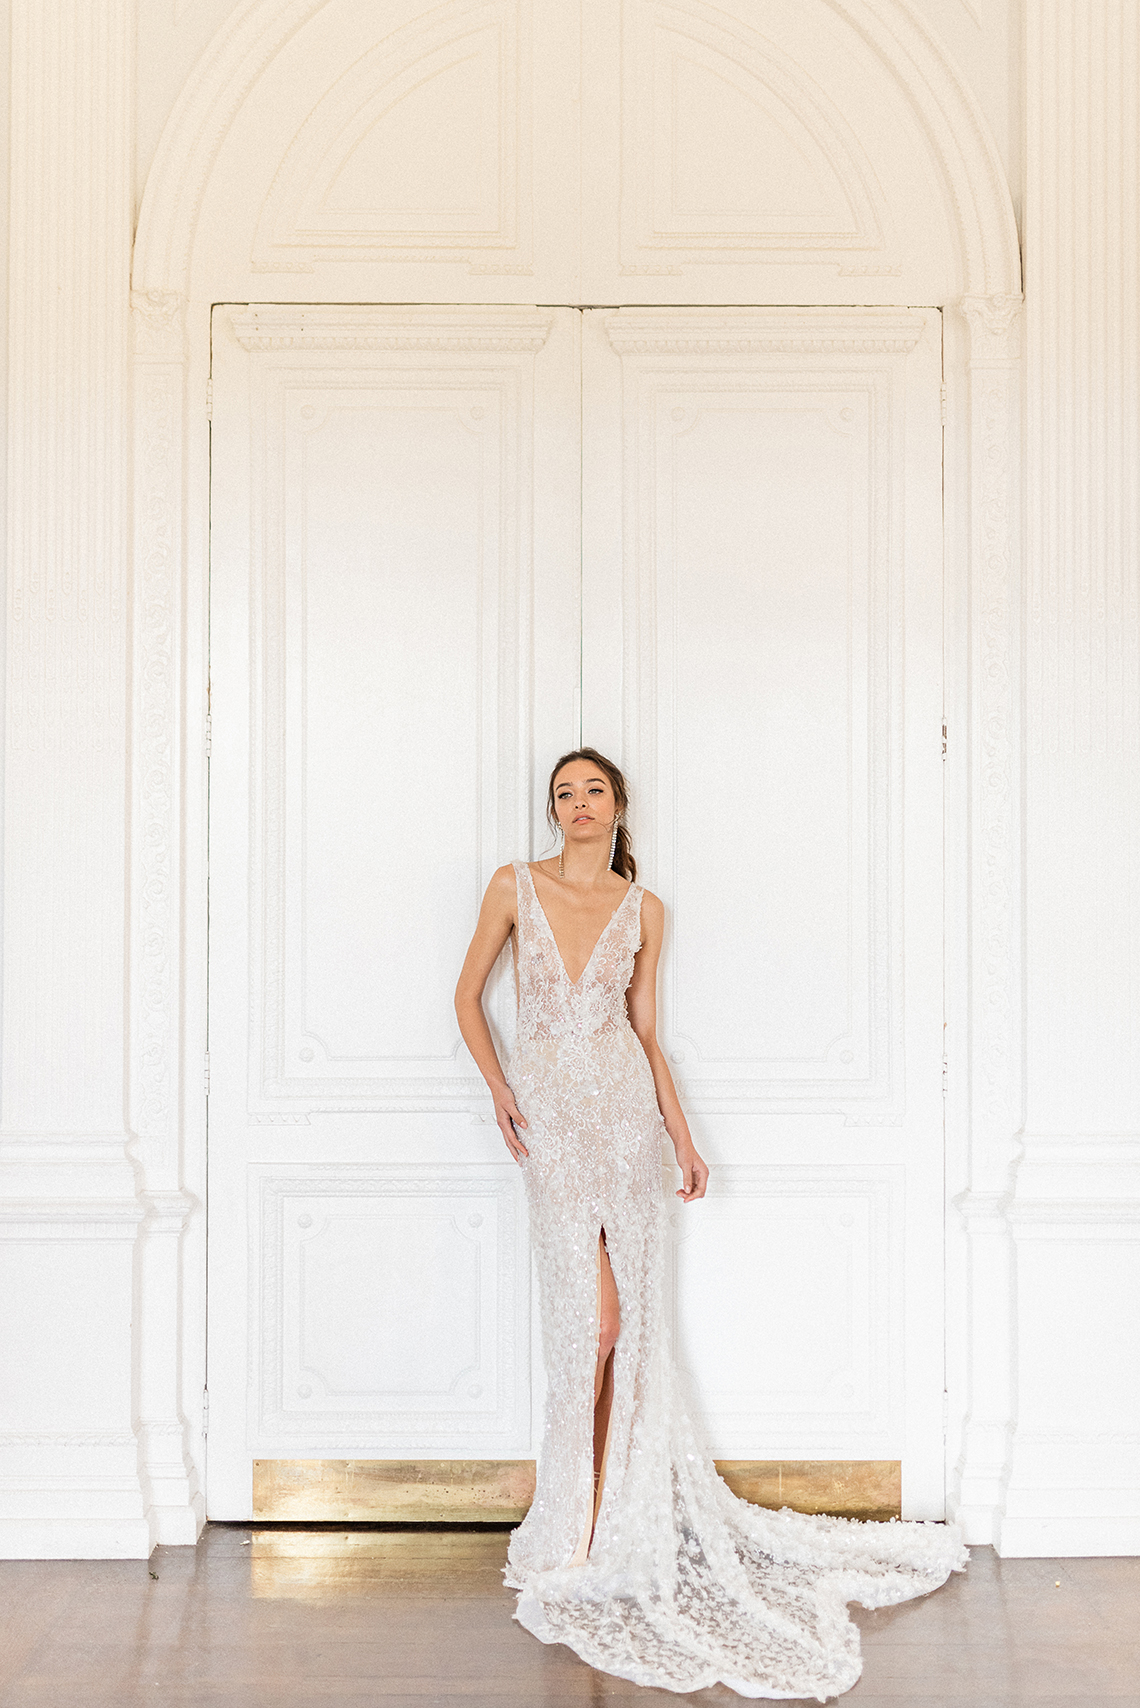 Luxurious and Opulent Wedding Inspiration Featuring Six Stunning Dresses – Gianluca and Mary Adovasio – Tigerlily Weddings 47